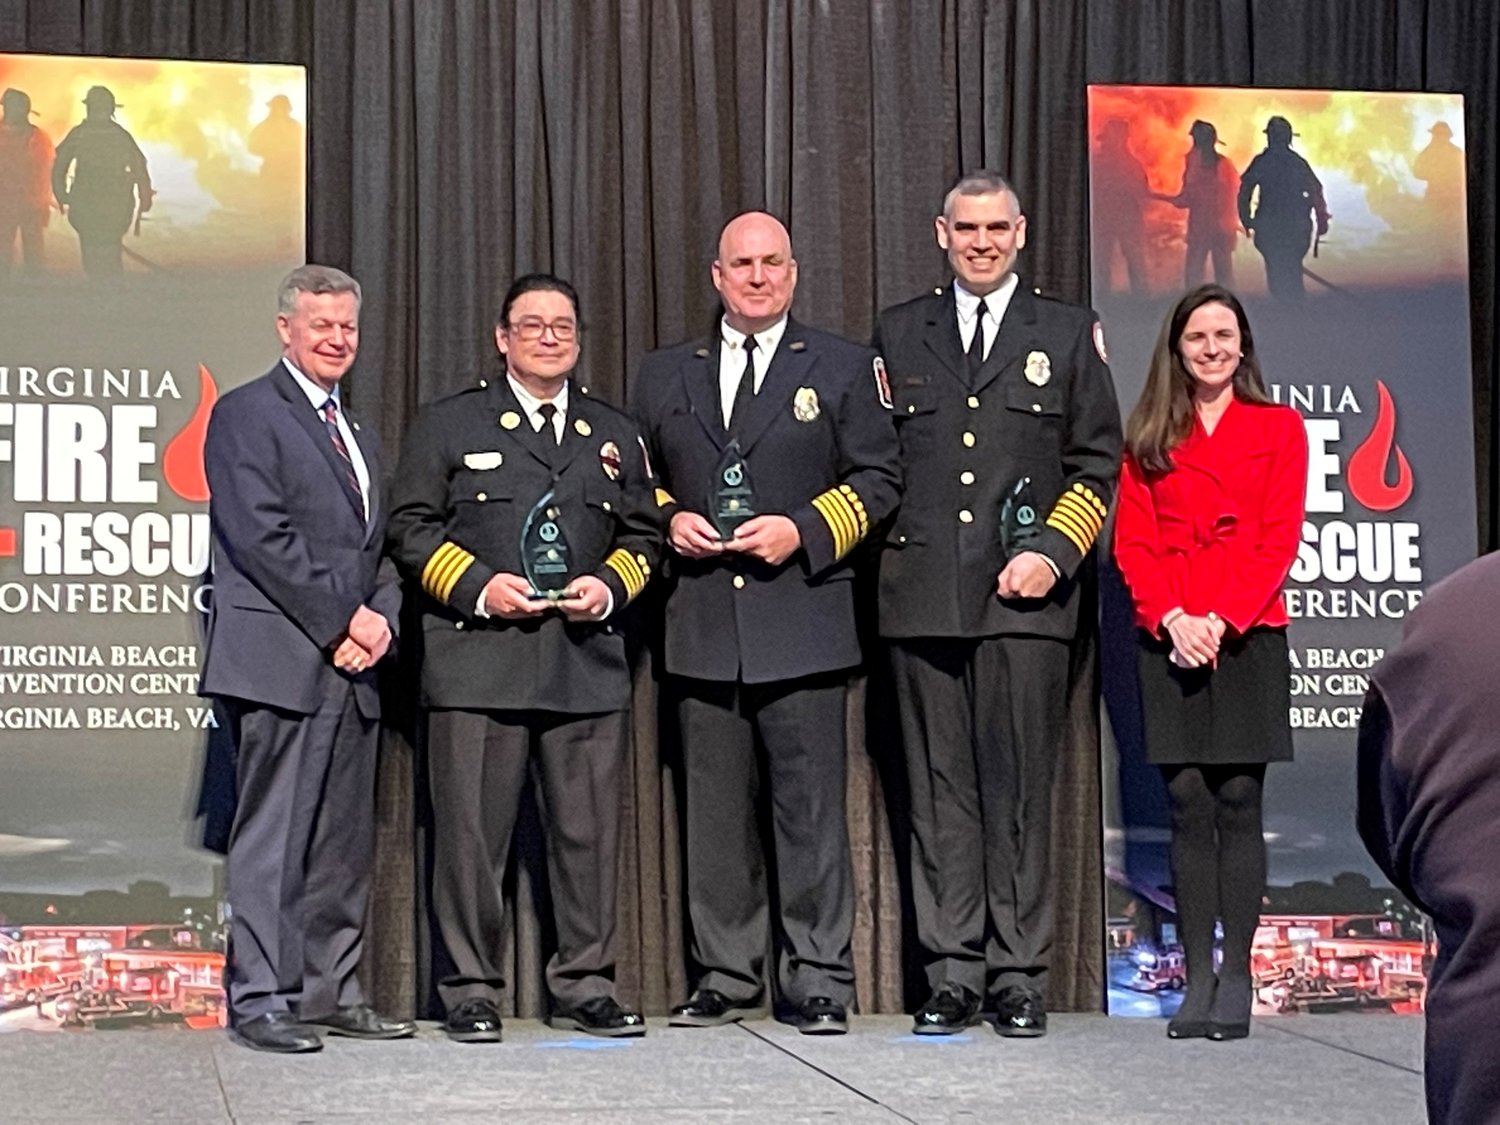 Accepting Outstanding Fire Department Response Award (left to right)

Bob Mosier, Secretary of Public Safety and Homeland Security

Assistant Chief Ernest DeSantis (Occoquan-Woodbridge-Lorton VFD)

Acting Chief James Forgo (Prince William County Fire & Rescue System)

David Glinski, President (Dumfries-Triangle VFD)

Maggie Cleary, Deputy Secretary of Public Safety and Homeland Security